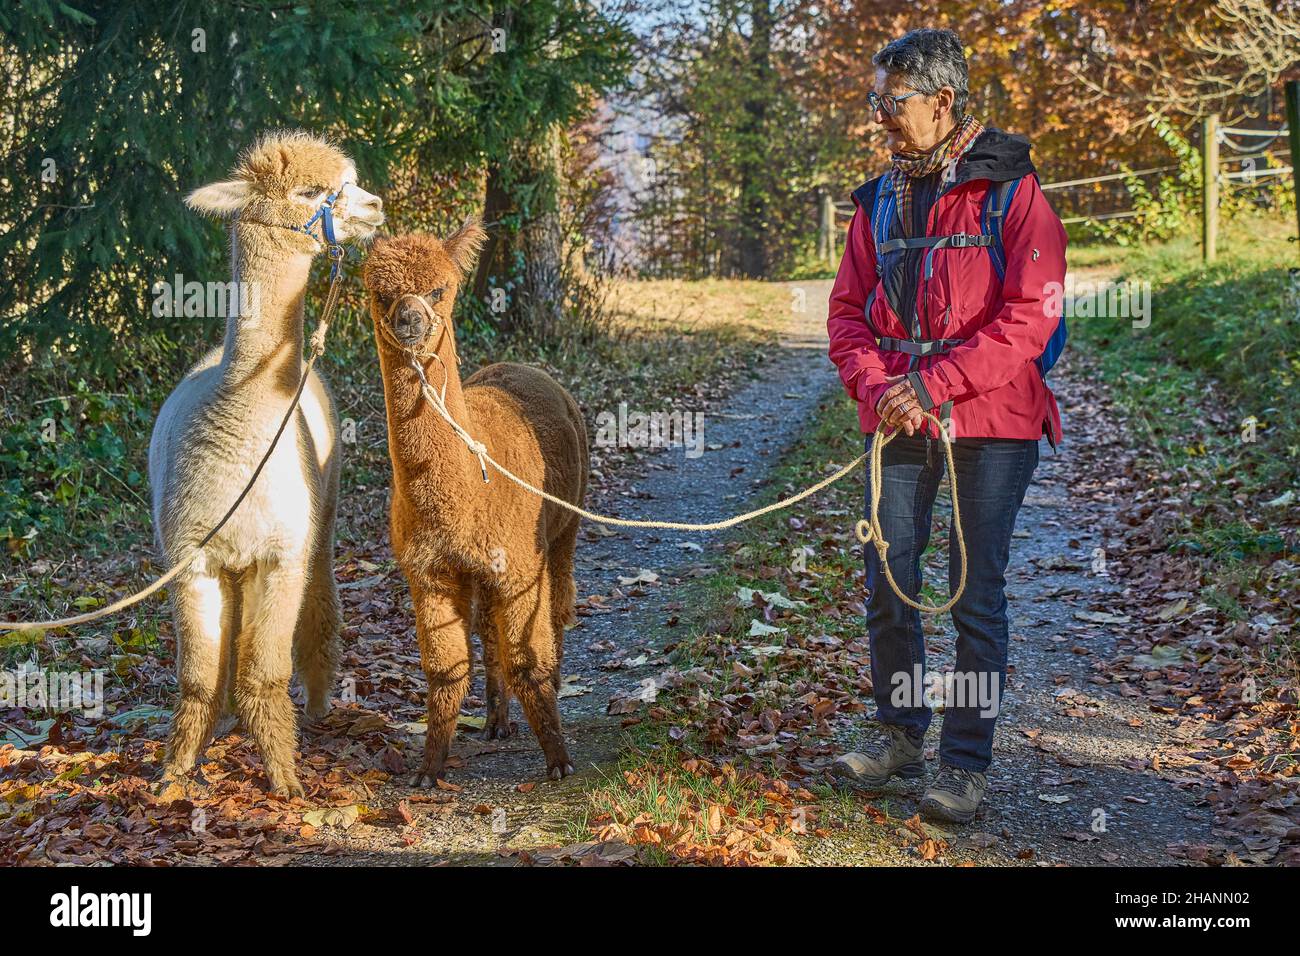 Woman In Red Jacket Is Walking Two Alpacas, Beige And Brown, On A Forest Path. Bauma Zurich Oberland Switzerland Stock Photo